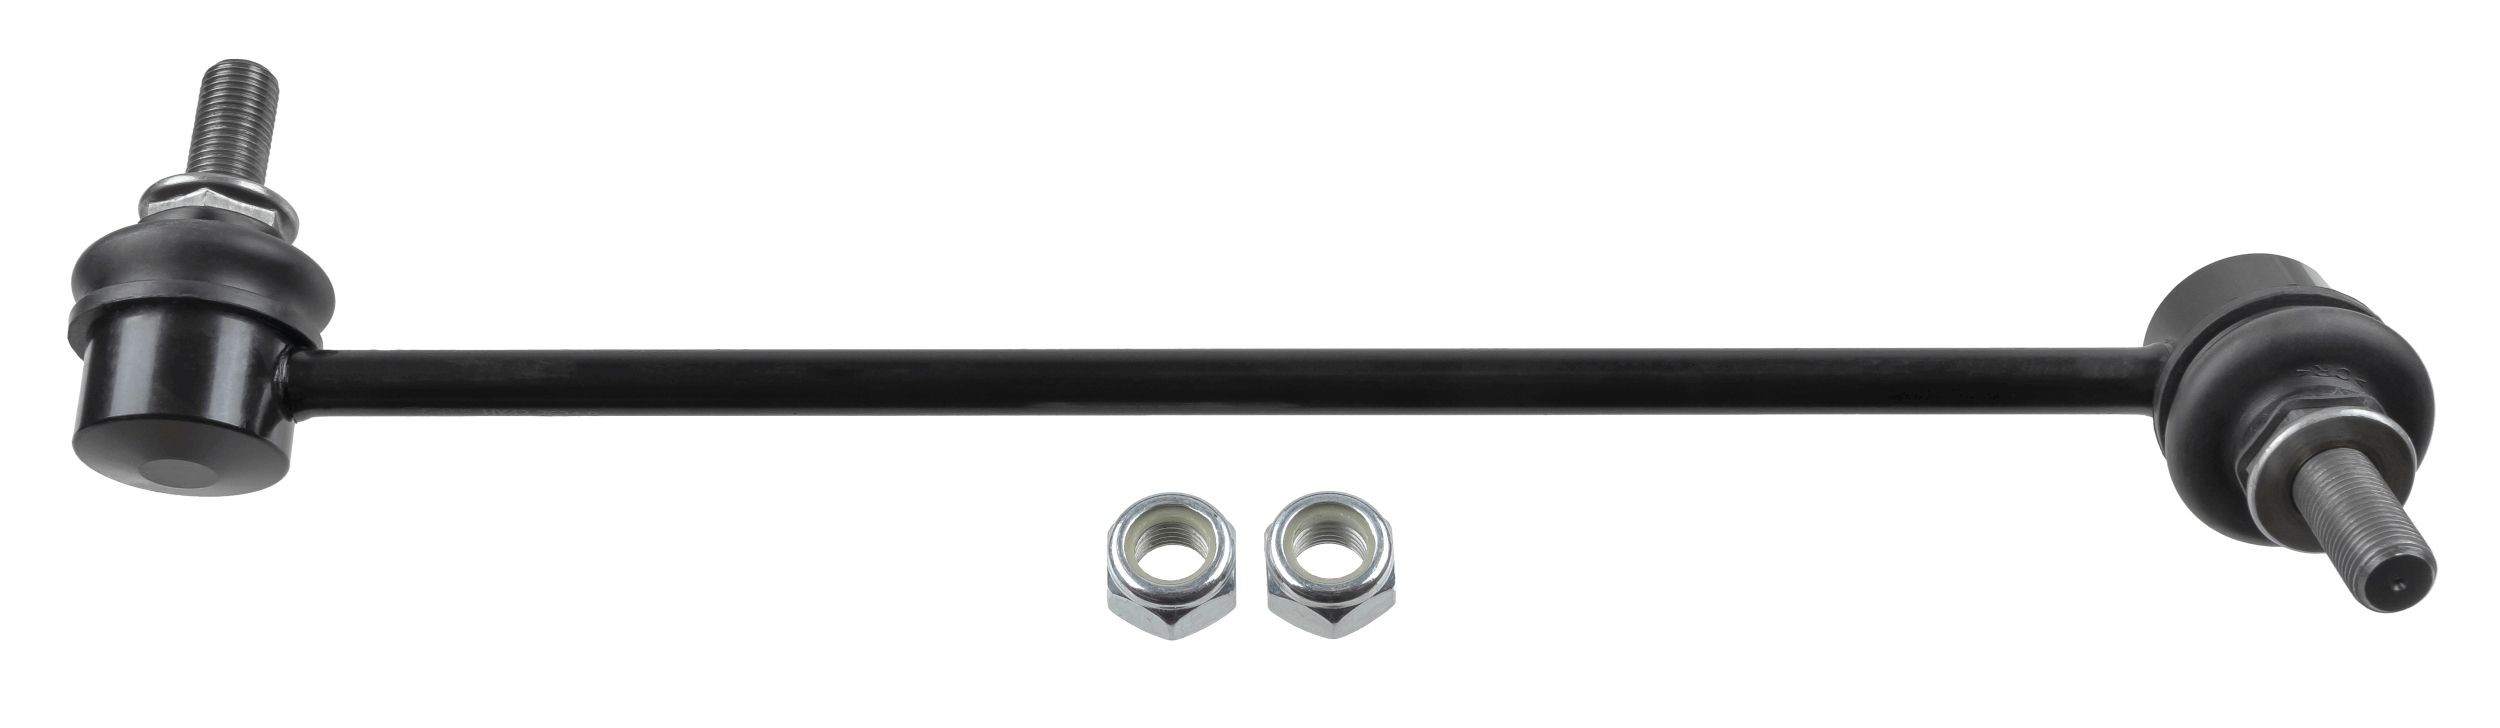 LEMFÖRDER 38618 01 Anti-roll bar link 308mm, M12*1.25 , for left-hand/right-hand drive vehicles